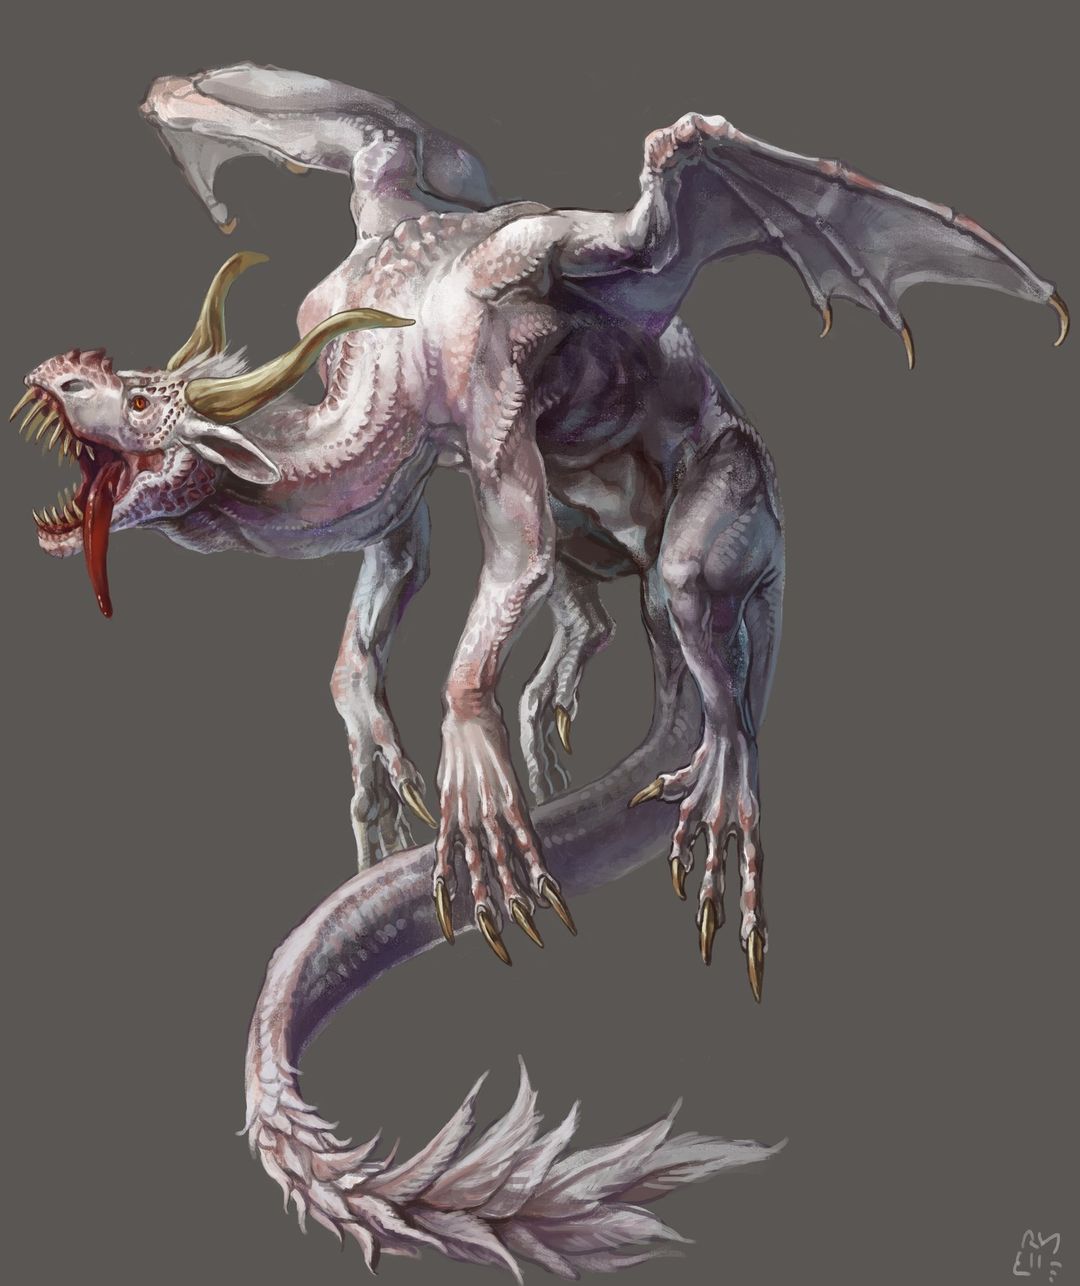 An albino dragon, It has white scales with just a hint of pink in some spots, and red eyes. The dragon is floating in midair, its two small-sized wings somehow keeping it aloft. It has yellowish horns and long ears like a cow, and its long red tongue is flopped out of its mouth like a dog.